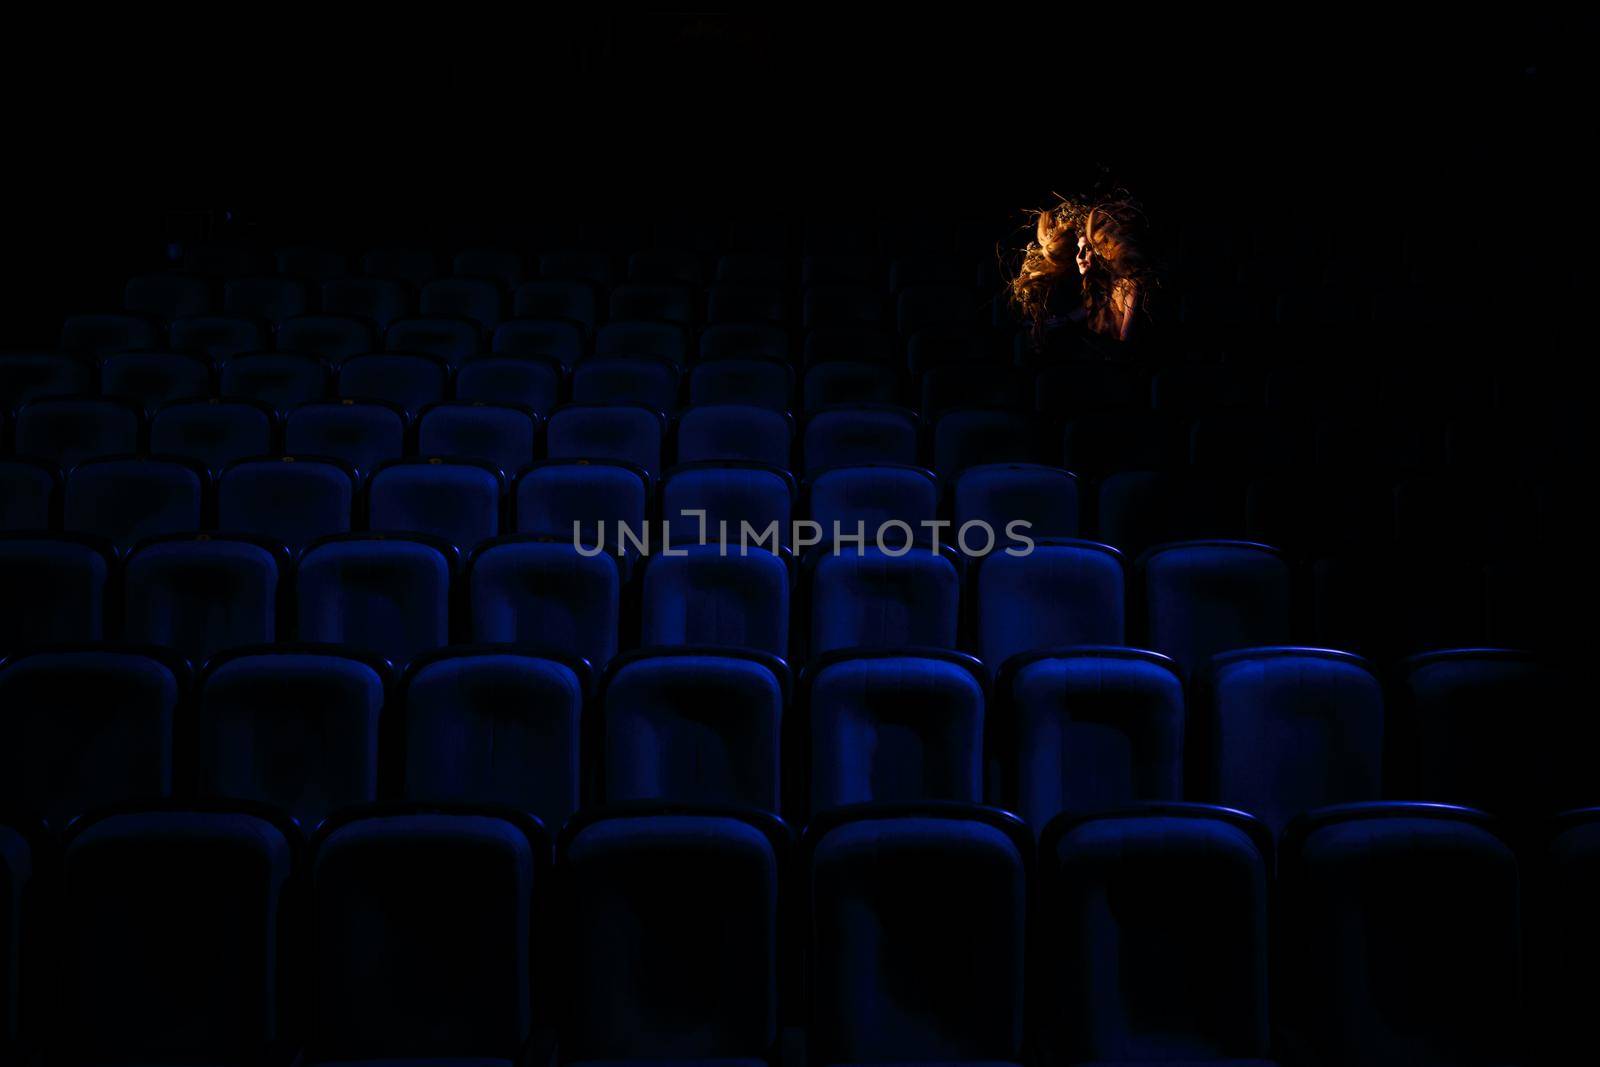 The girl who plays the role of a Ghost or spirit in the theater is sitting between the rows of chairs by deandy